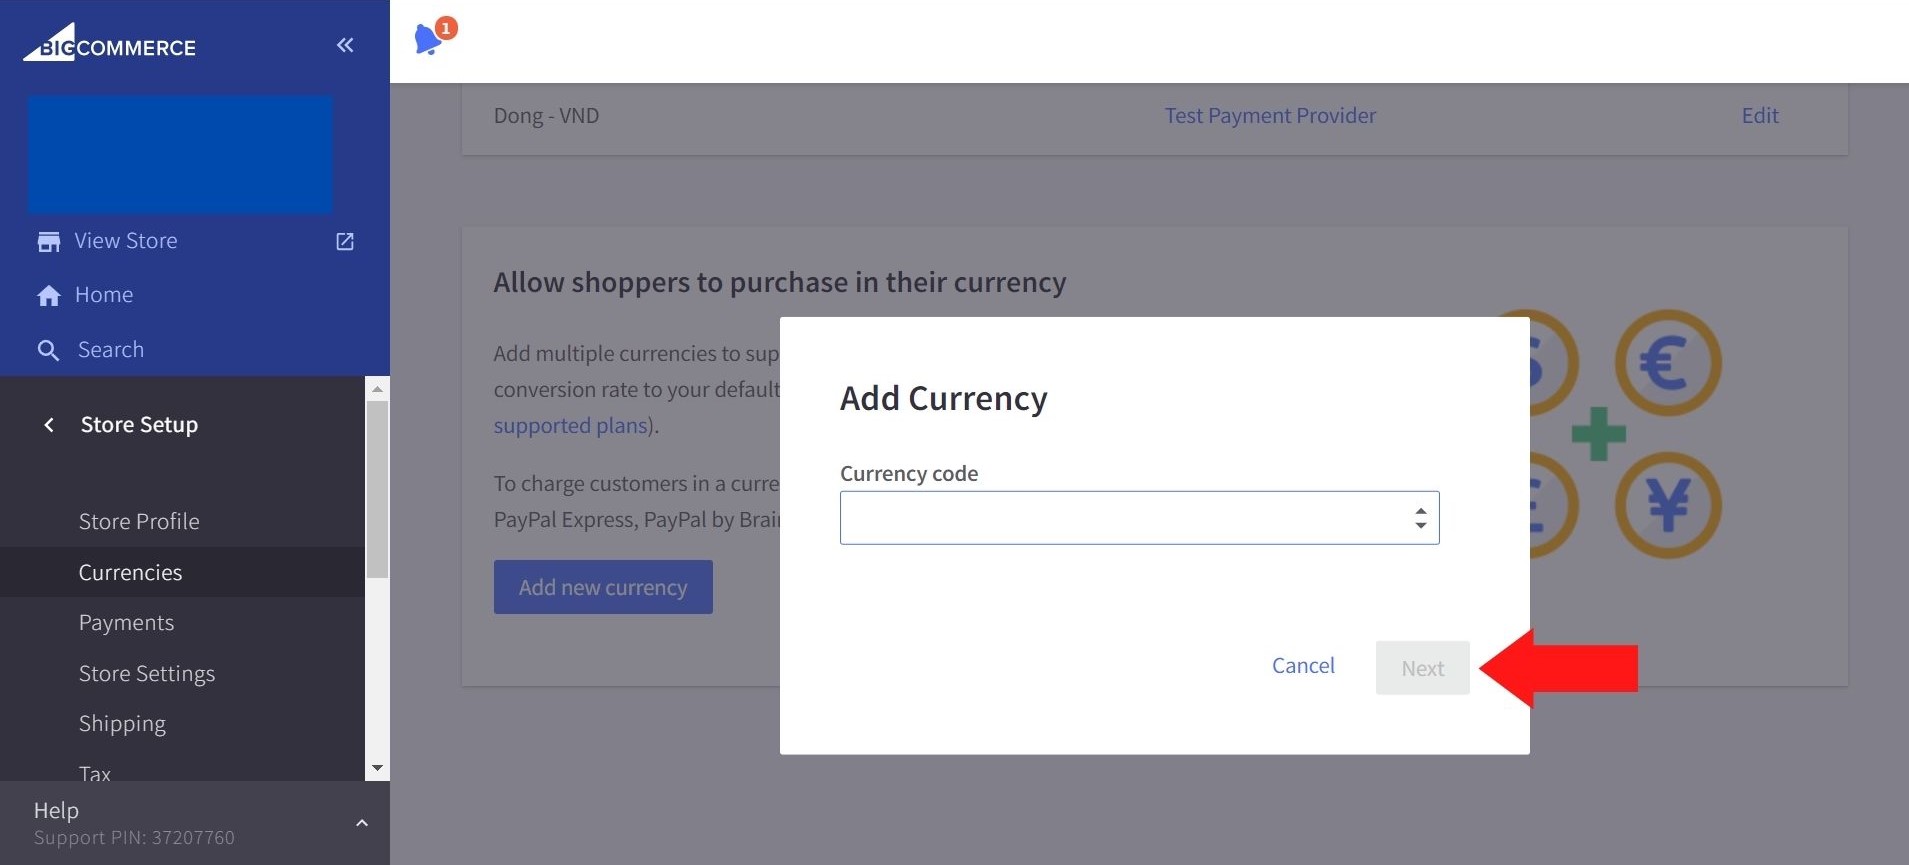 Then choose a currency that you want to add, click on next